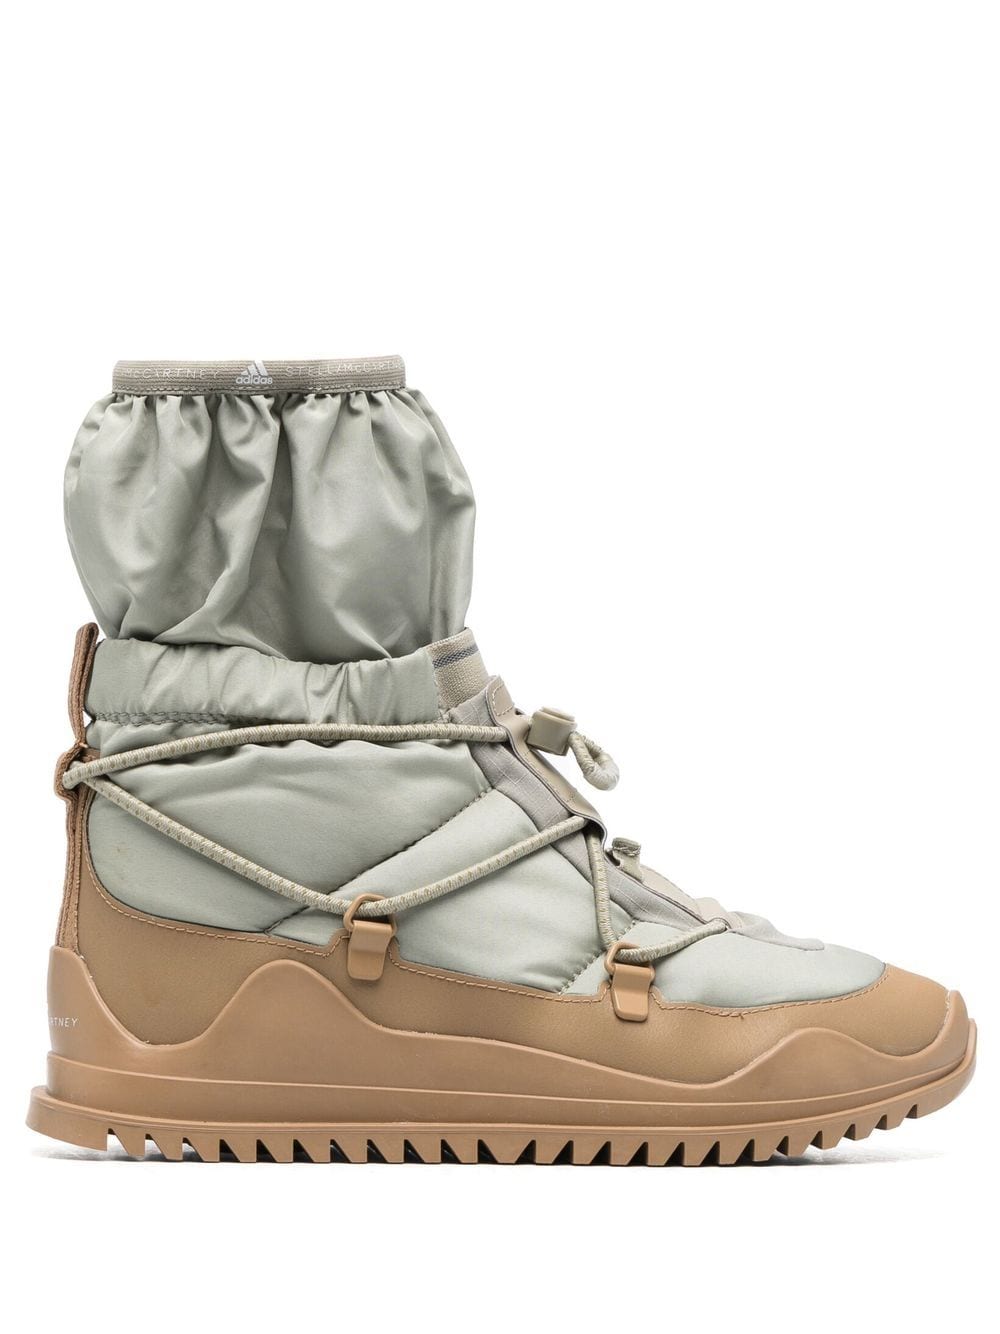 adidas by Stella McCartney lace-up high-top sneakers - Green